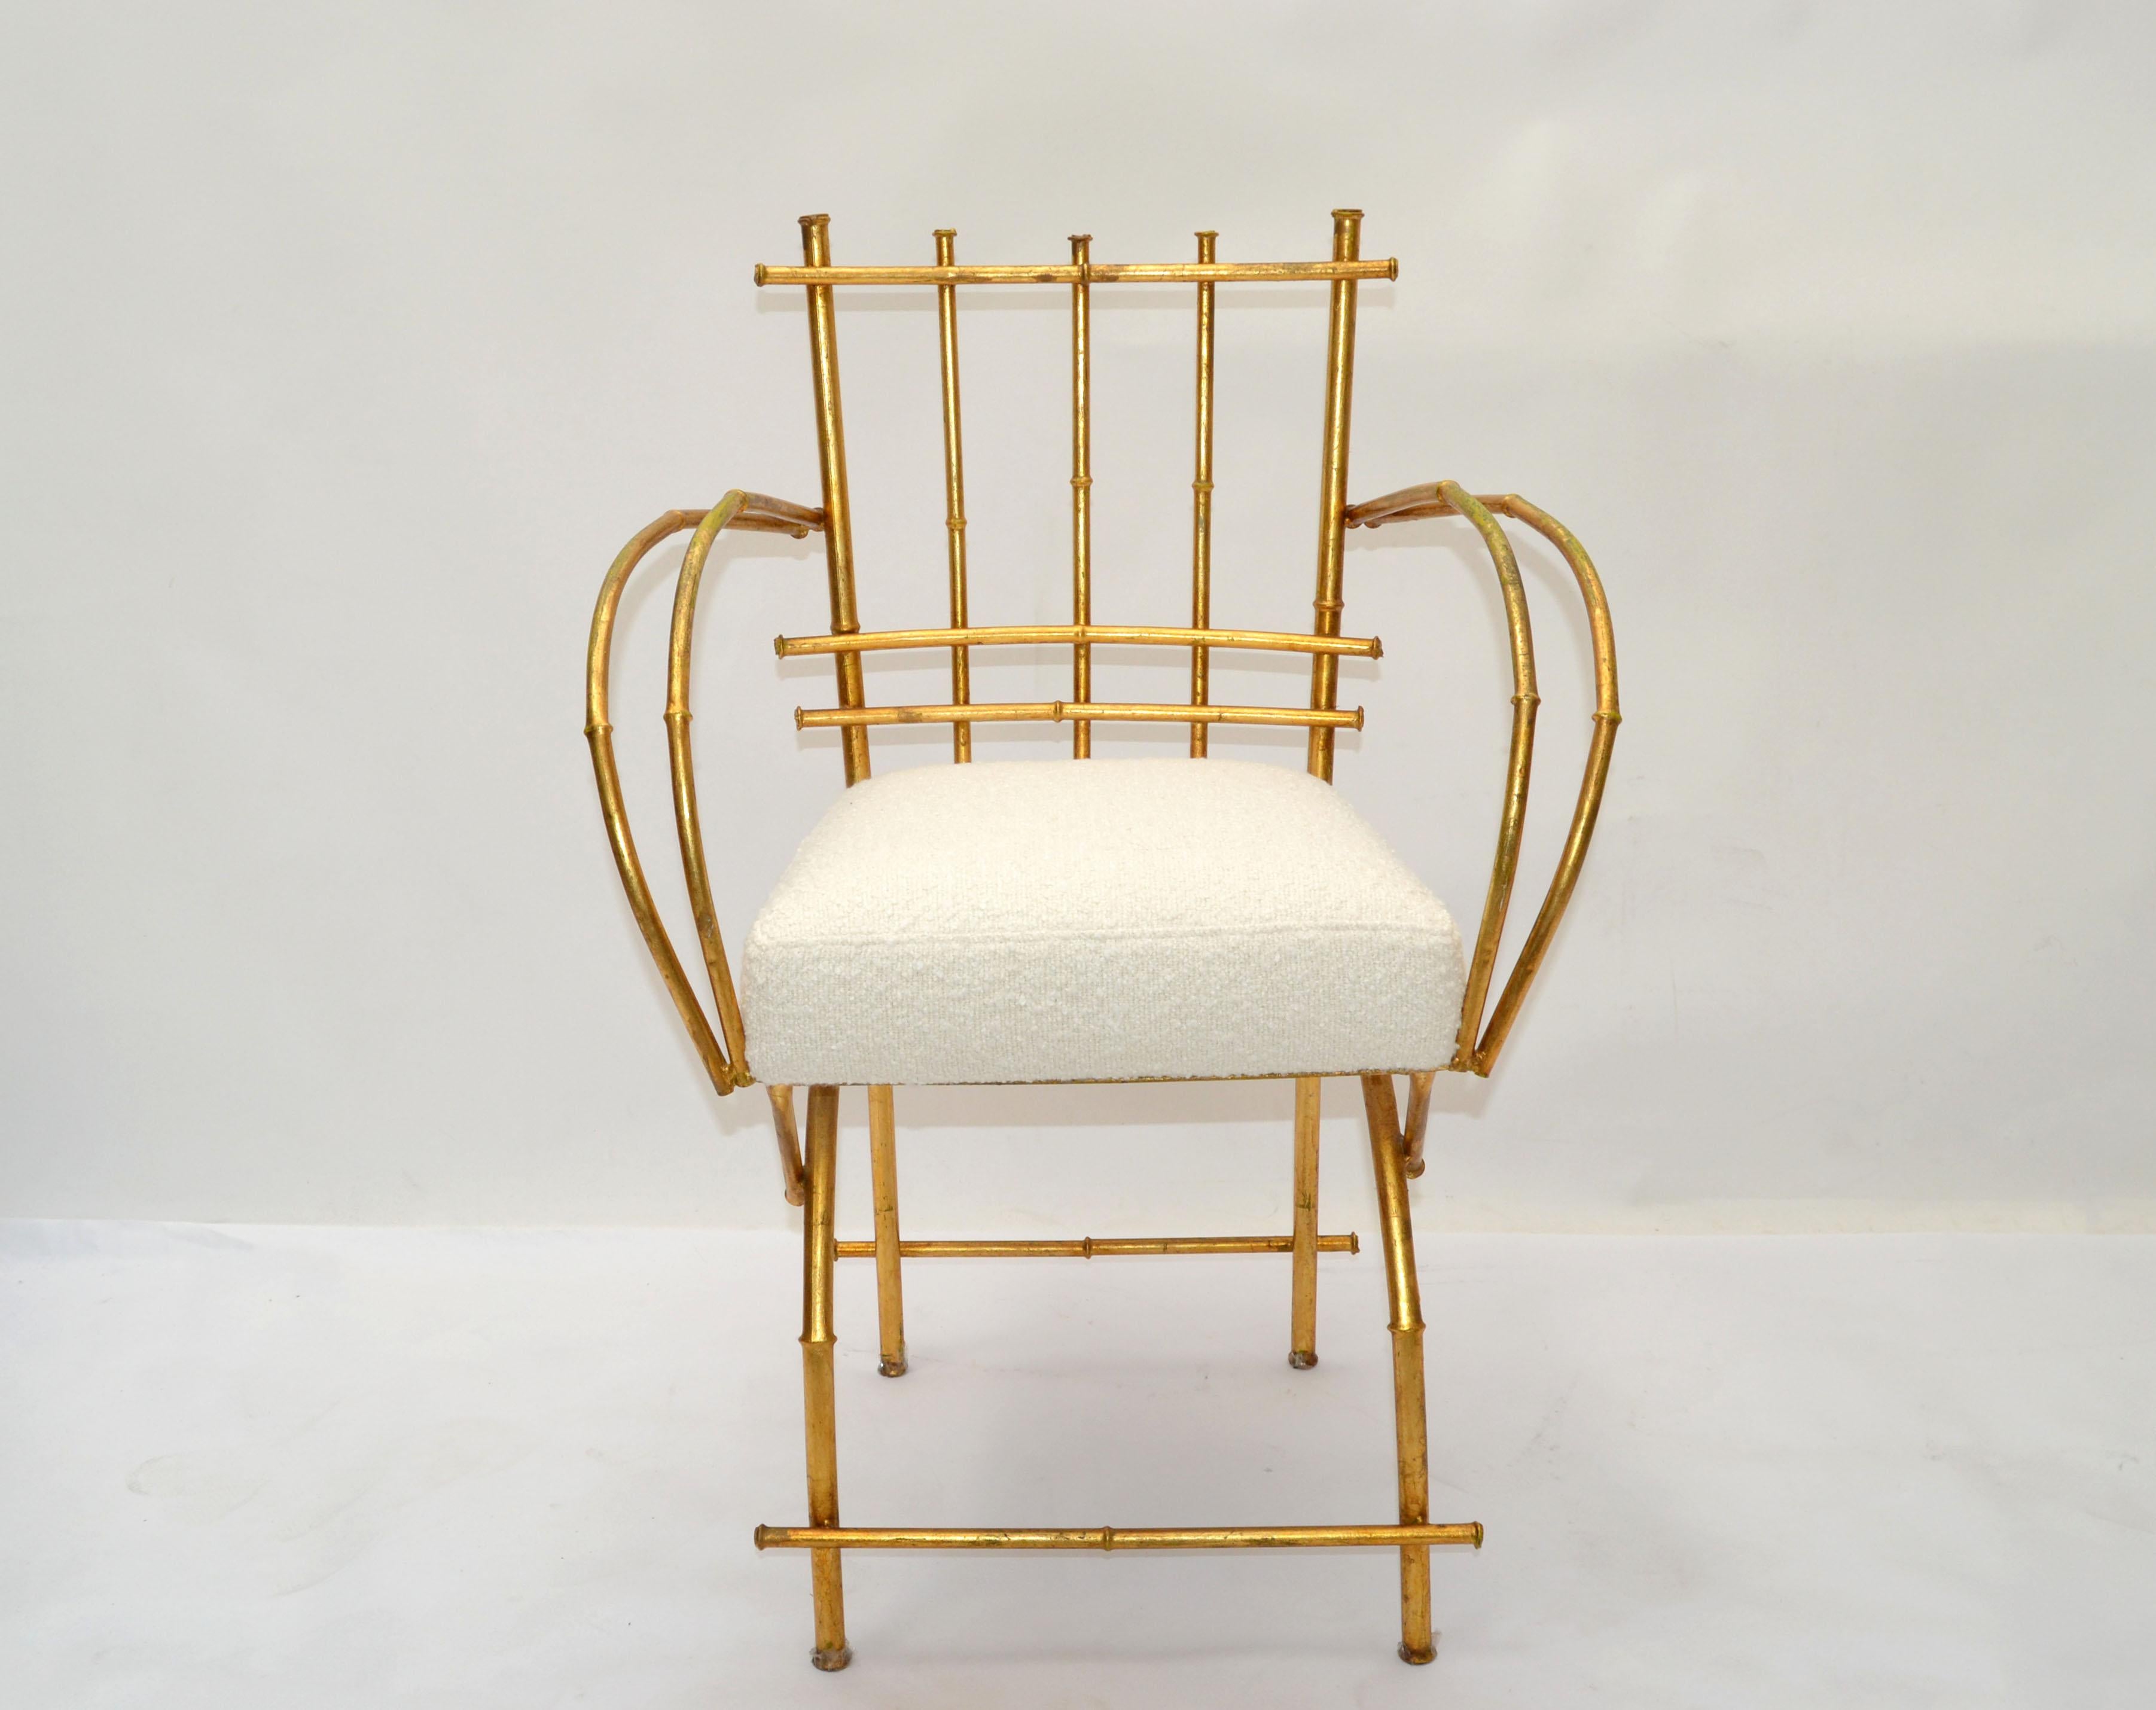 We offer a faux bamboo metal armchair or vanity chair in gold finish sculptural crafted and has a new upholstered seat cushion in a cream color bouclé fabric.
Made in America in the 1950.
Ready to use with some wear to the gilt paint due to